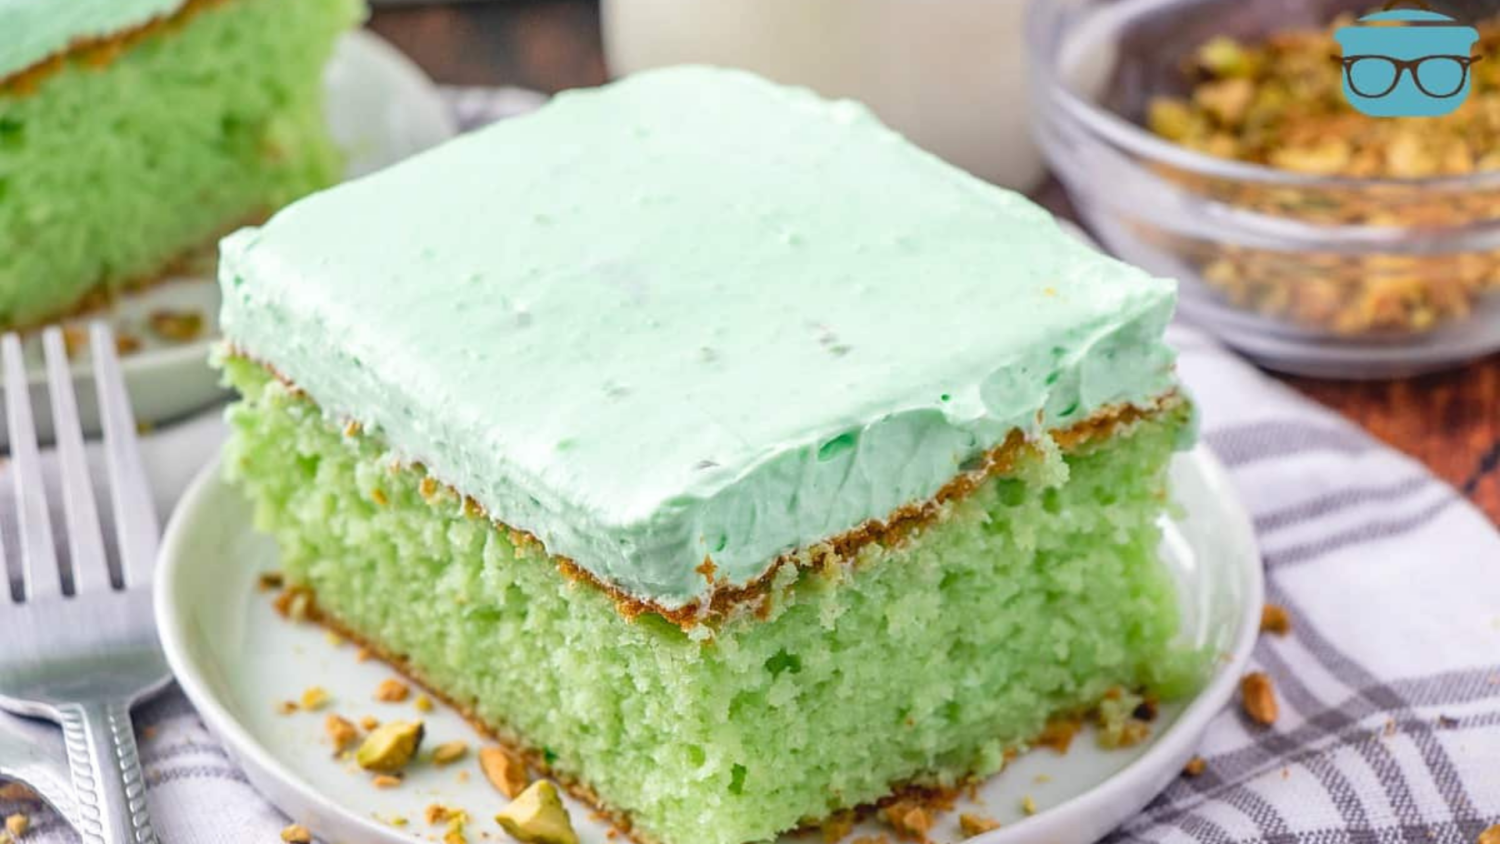 Green pistachio cake with green icing